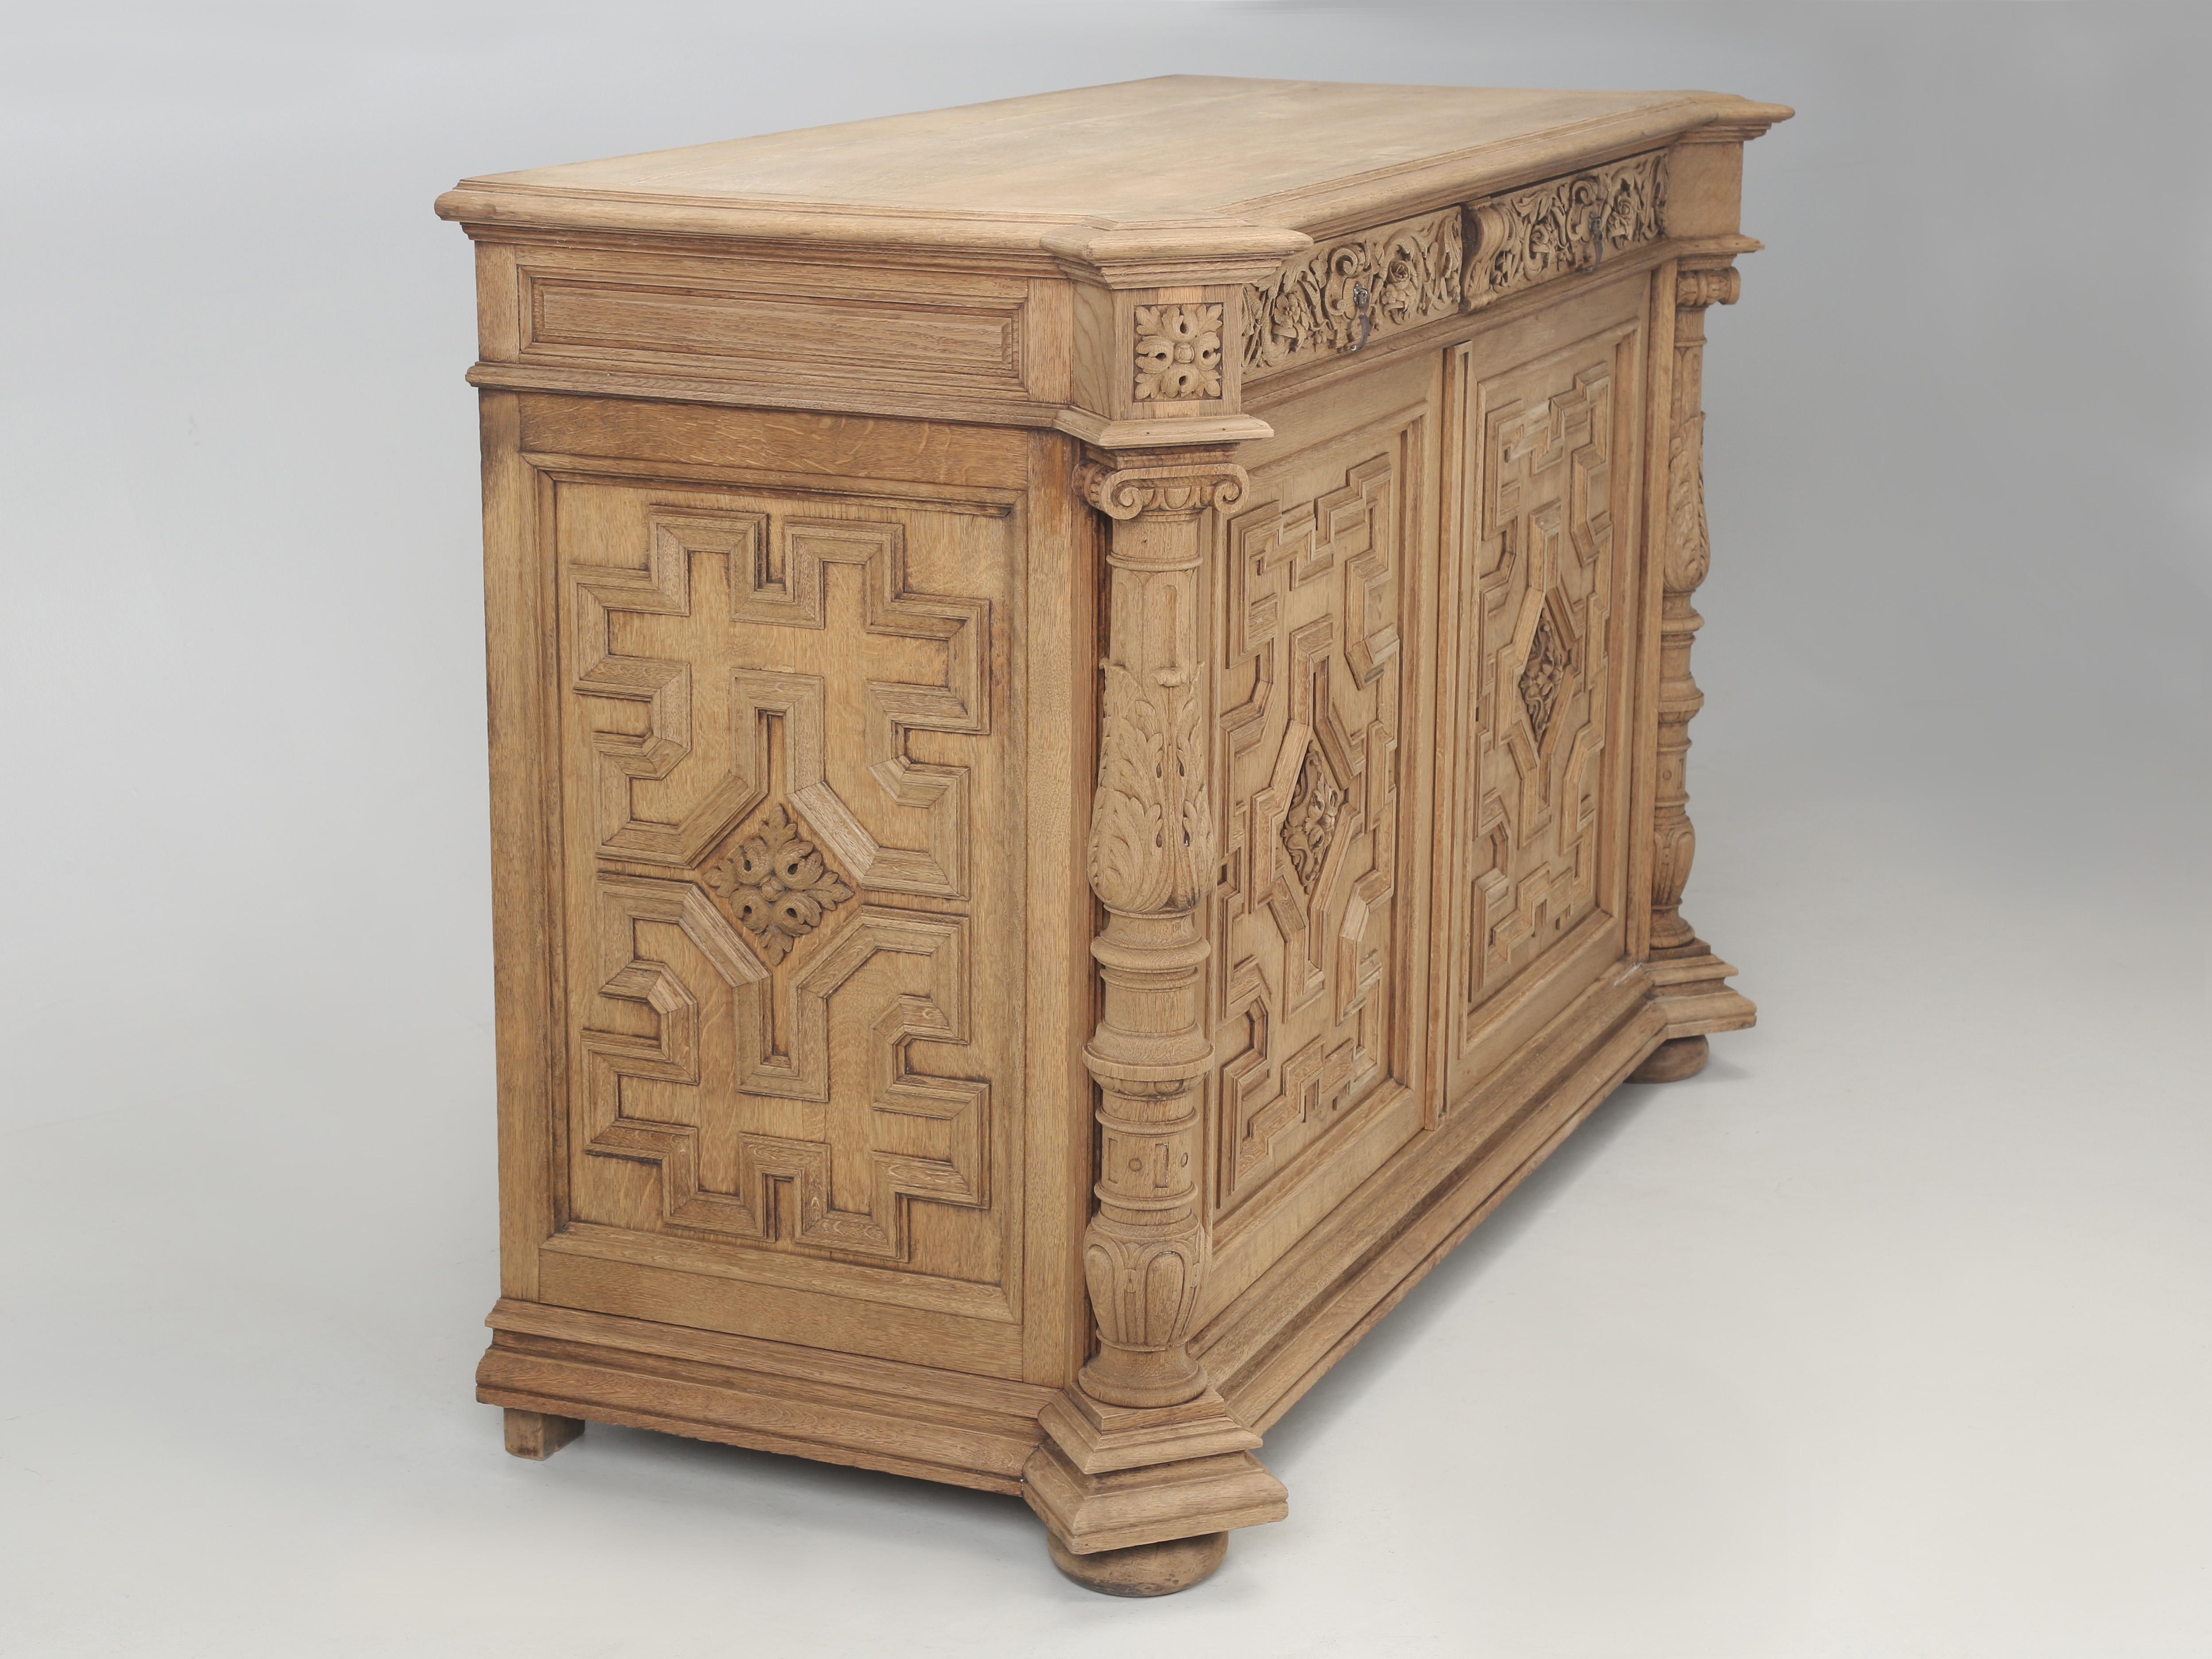 Antique French Buffet made with extraordinary quality and attention to detail throughout. We only wish we knew the history for this incredible French white oak 2-door Buffet, for it may have been built by a maître artisan (master craftsman). The